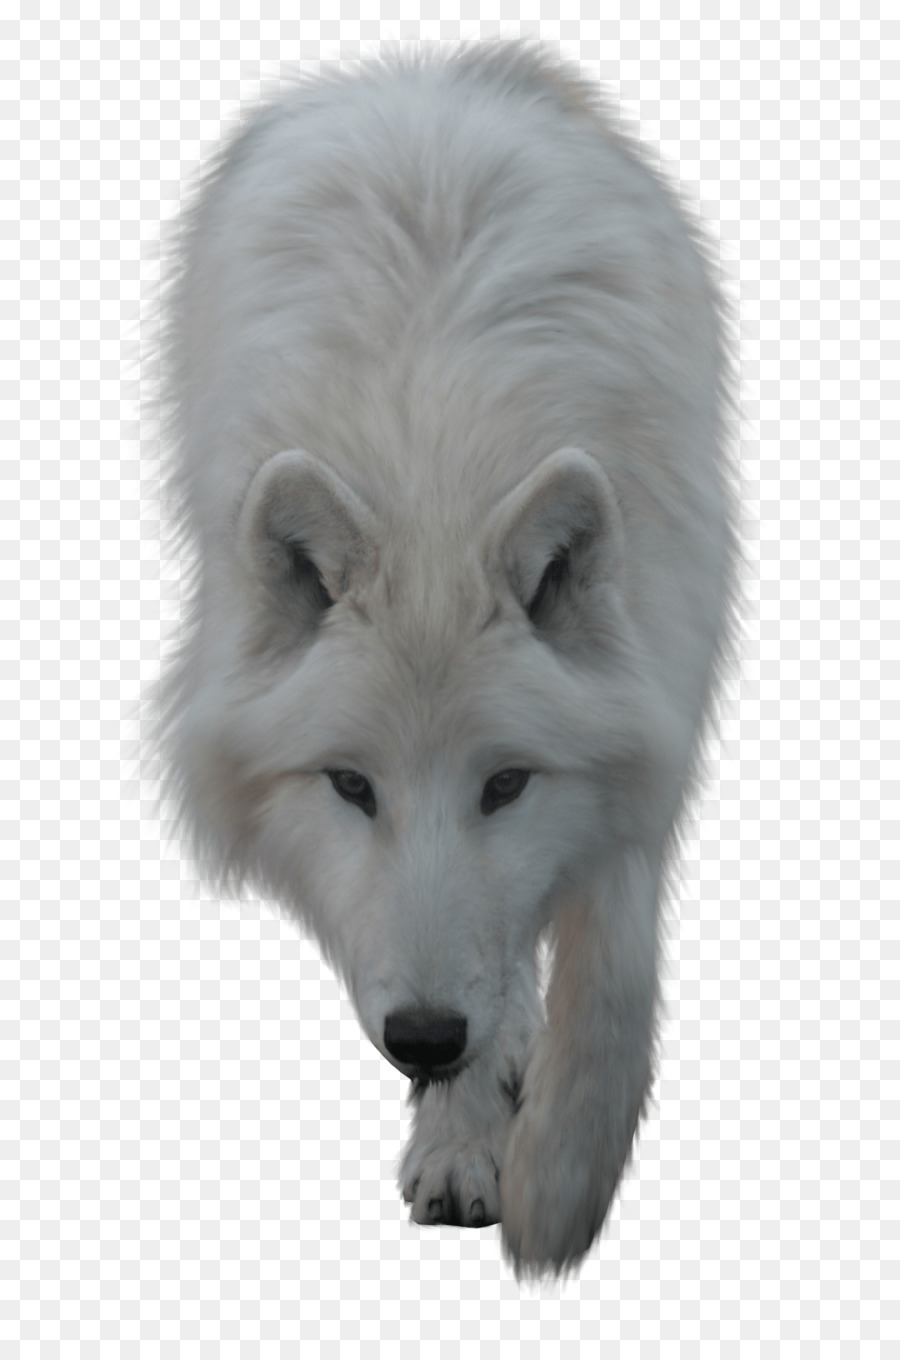 Arctic wolf Clip art - wolf-head png download - 1296*1944 - Free Transparent Arctic Wolf png Download.